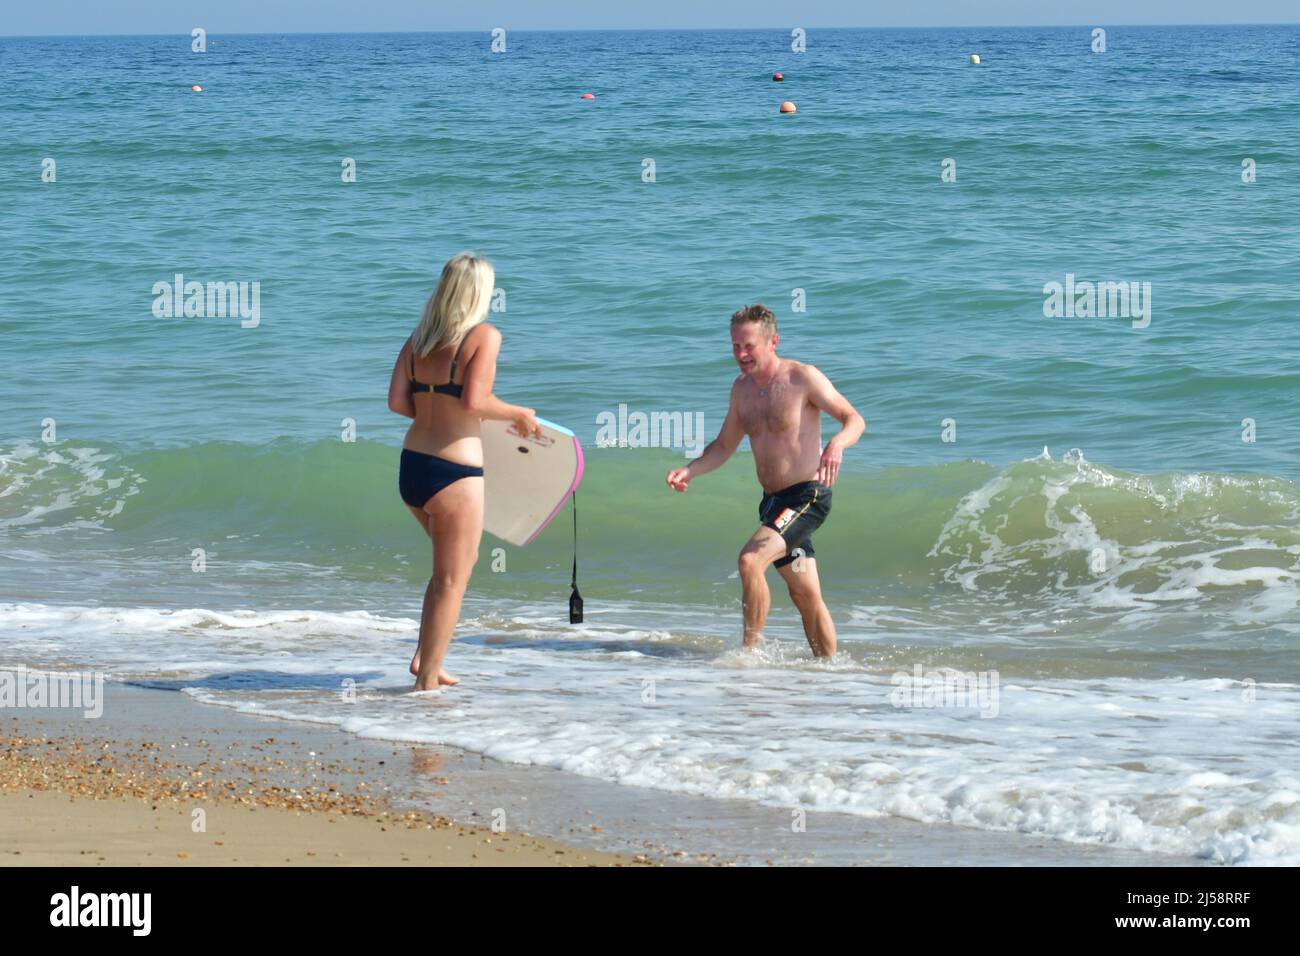 Boscombe, Bournemouth, Dorset, UK, 21st April 2022, Weather. Warm bright sunshine and above average temperatures in the afternoon brings people to the beach. Couple braving the cold sea with a bodyboard. Credit: Paul Biggins/Alamy Live News Stock Photo